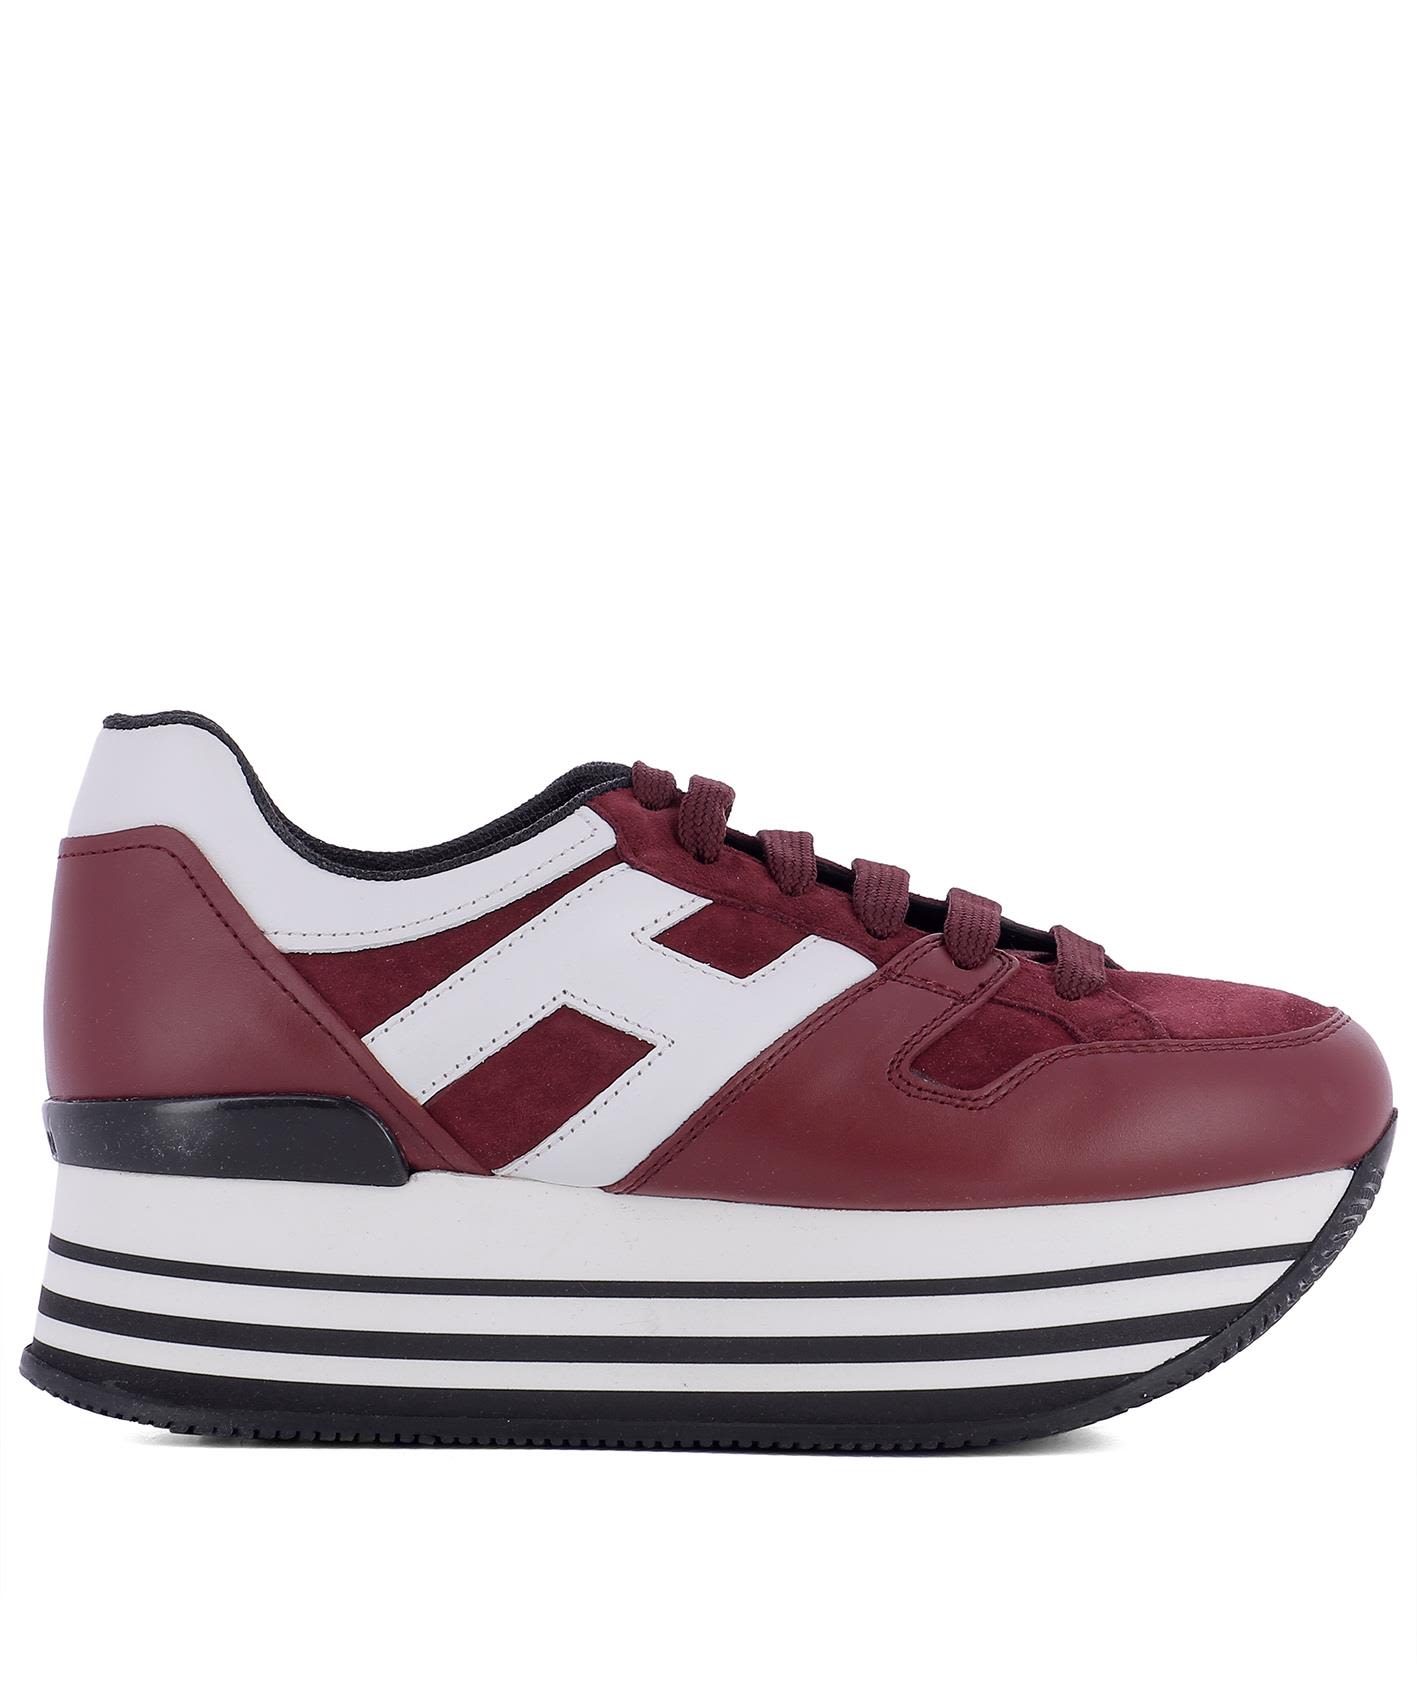 HOGAN SUEDE AND LEATHER SNEAKERS WITH PLATFORM, BORDEAUX/WHITE | ModeSens